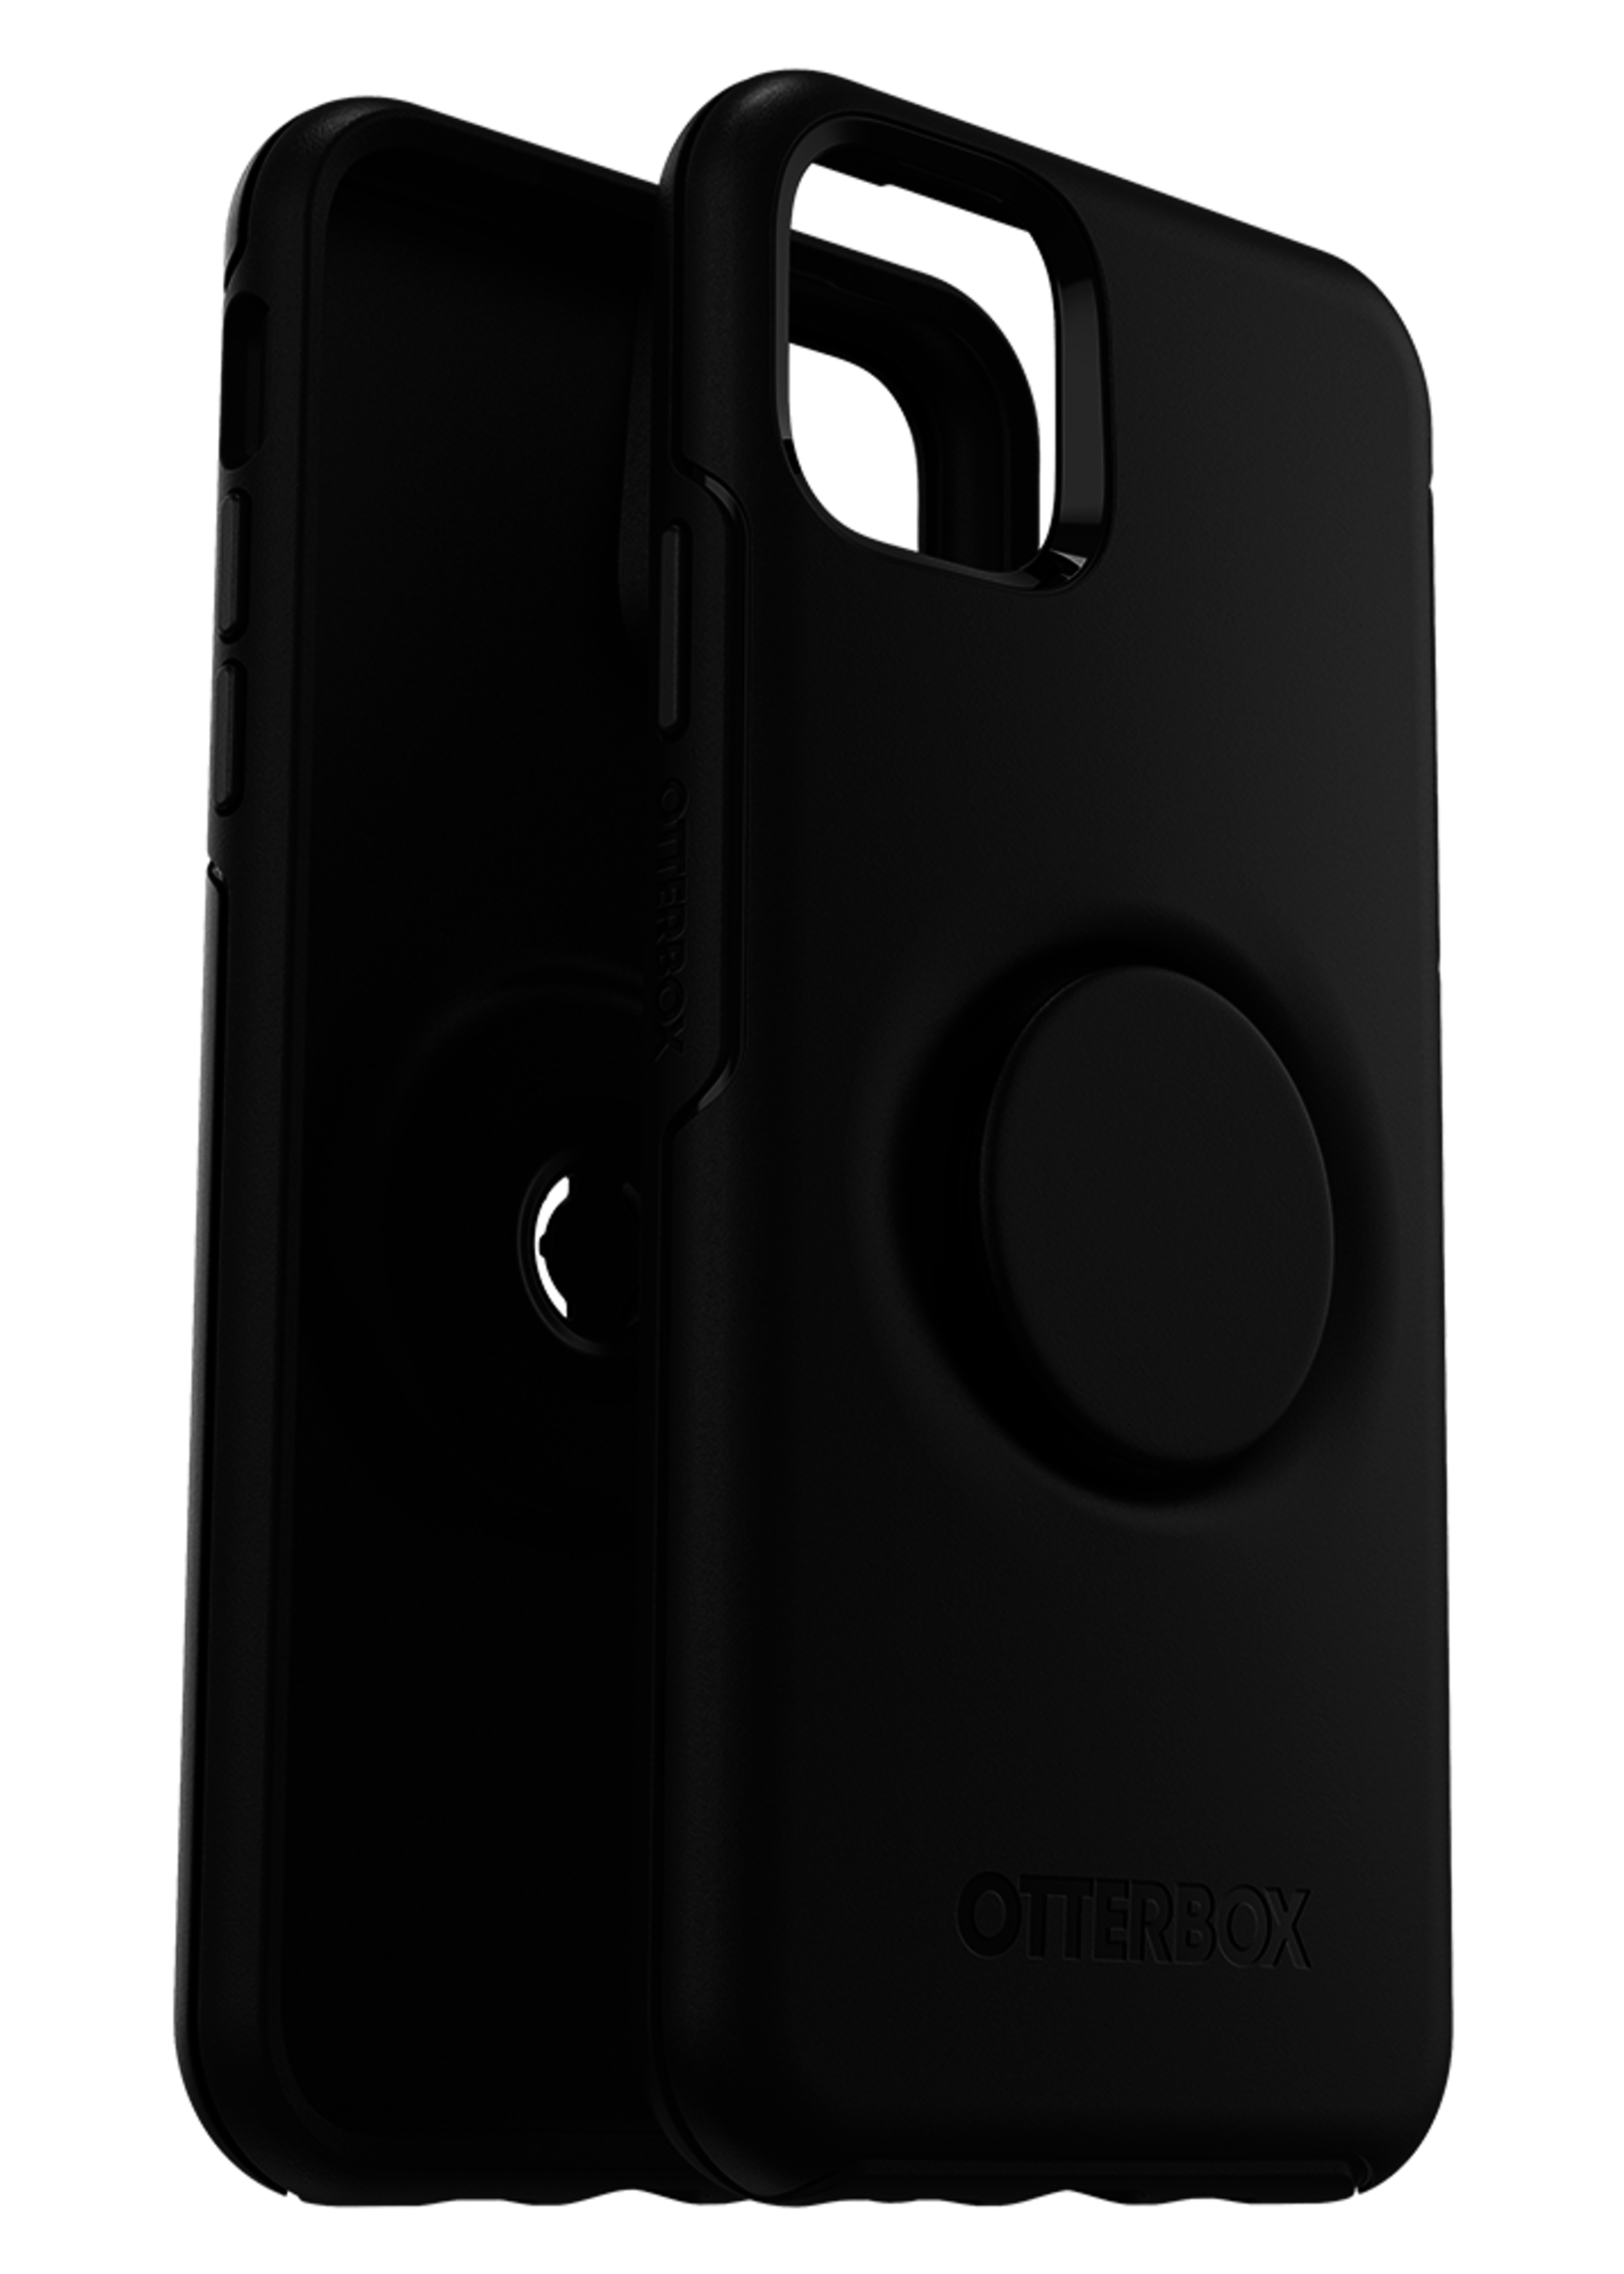 Otterbox OtterBox - Otter + Pop Symmetry Case with PopGrip for Apple iPhone 11 Pro Max - Black